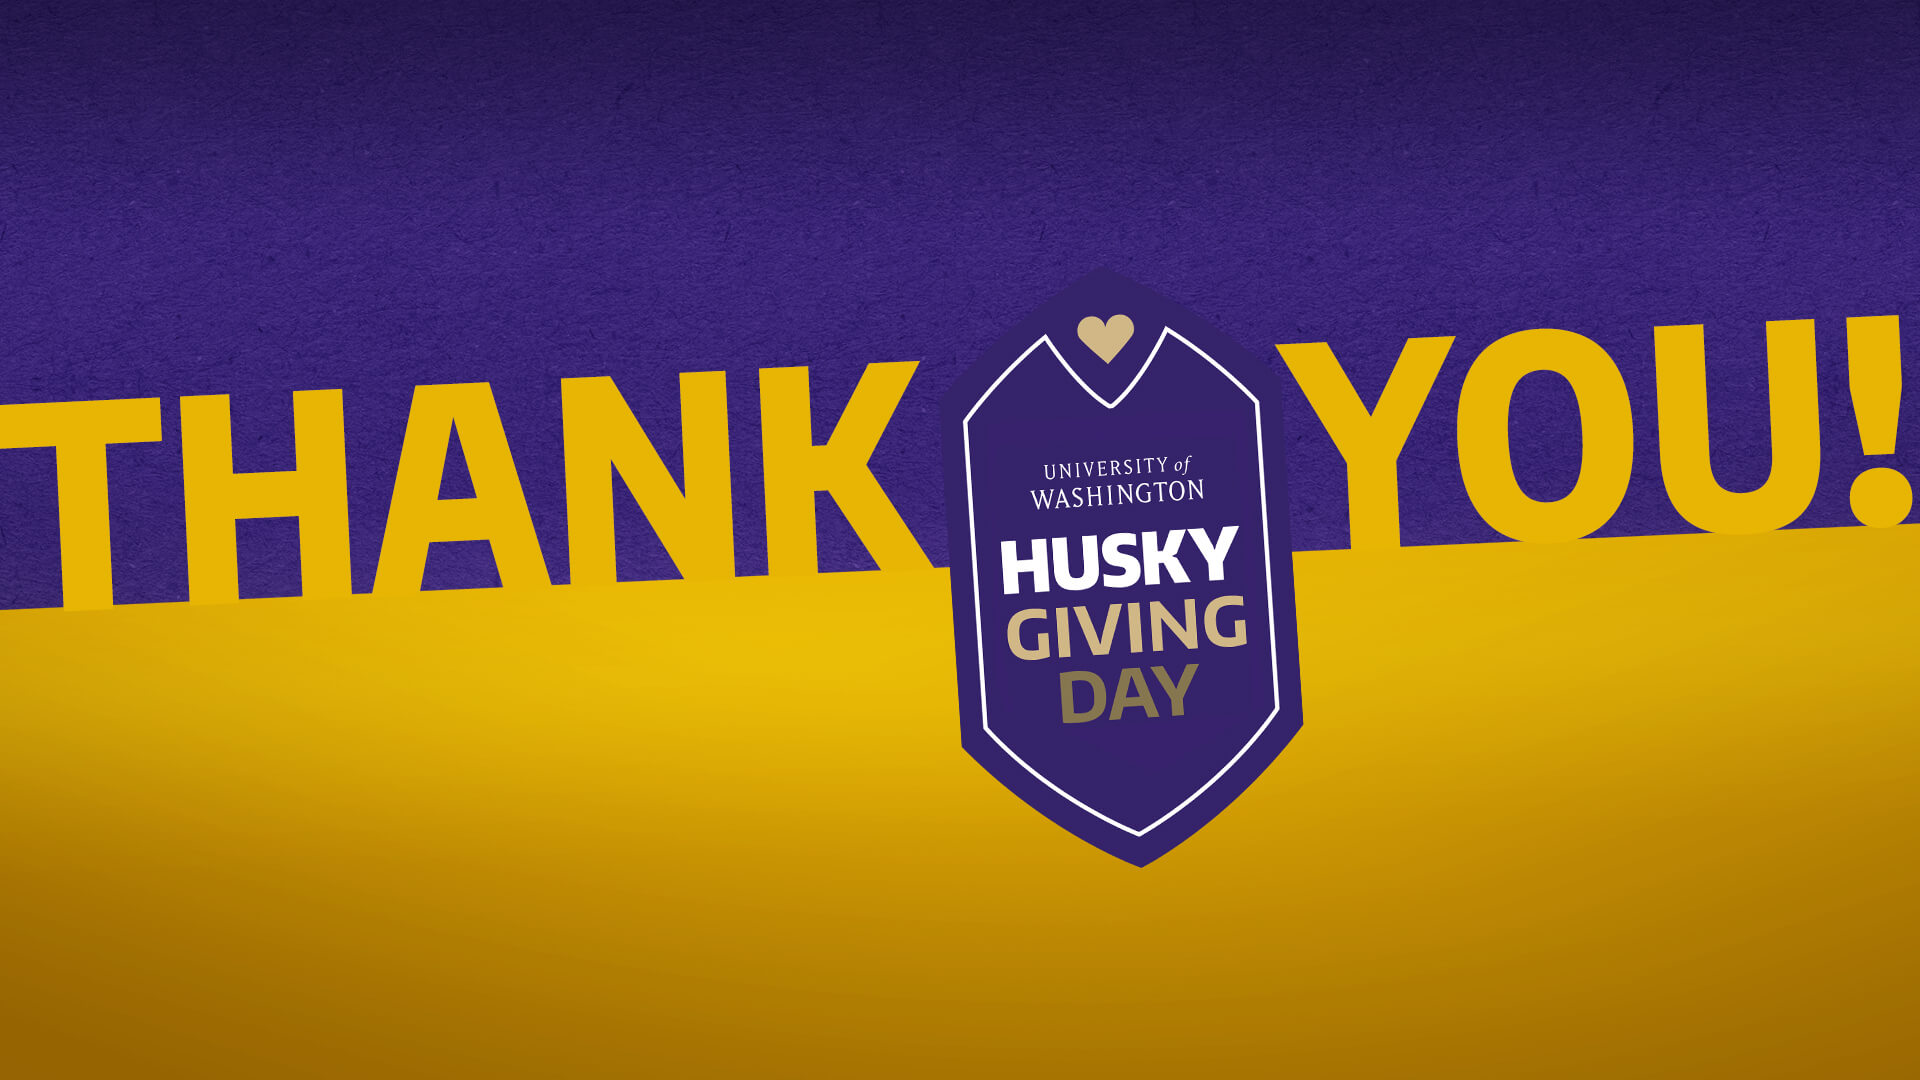 Photo of text: Thank You! with a "badge" reading University of Washington Husky Giving Day with a purple and gold background